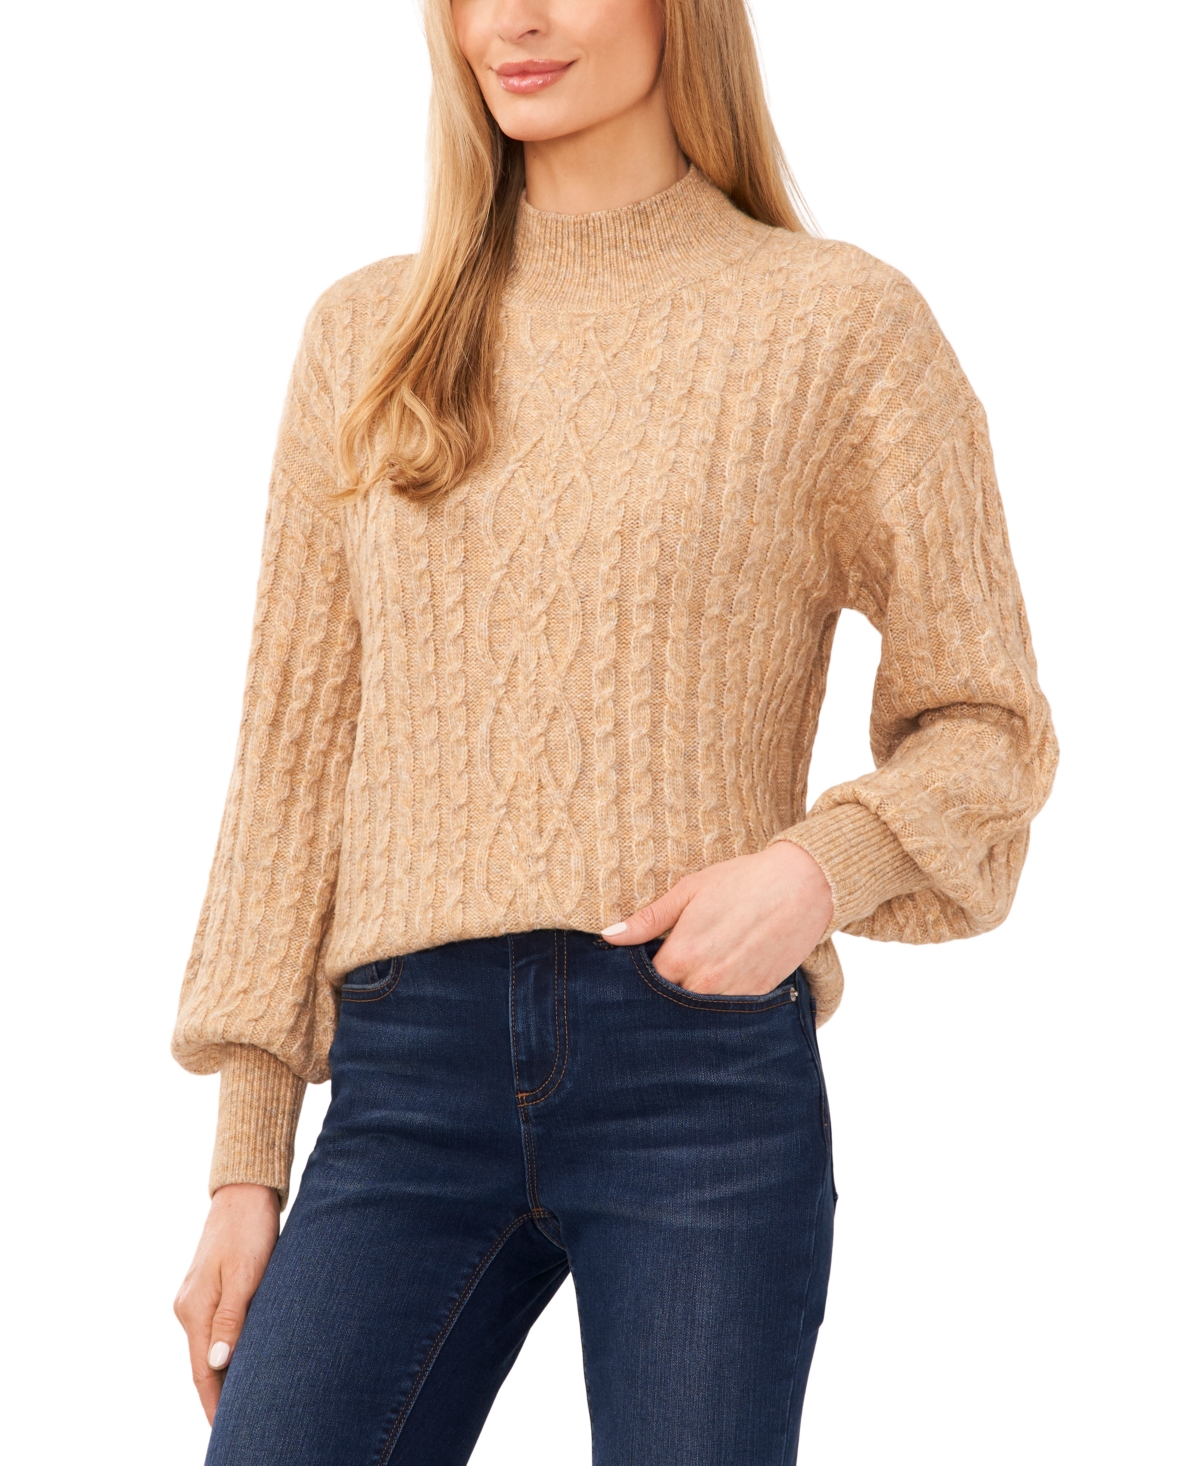 CeCe Women's Cable-Knit Mock Neck Bishop-Sleeve Sweater